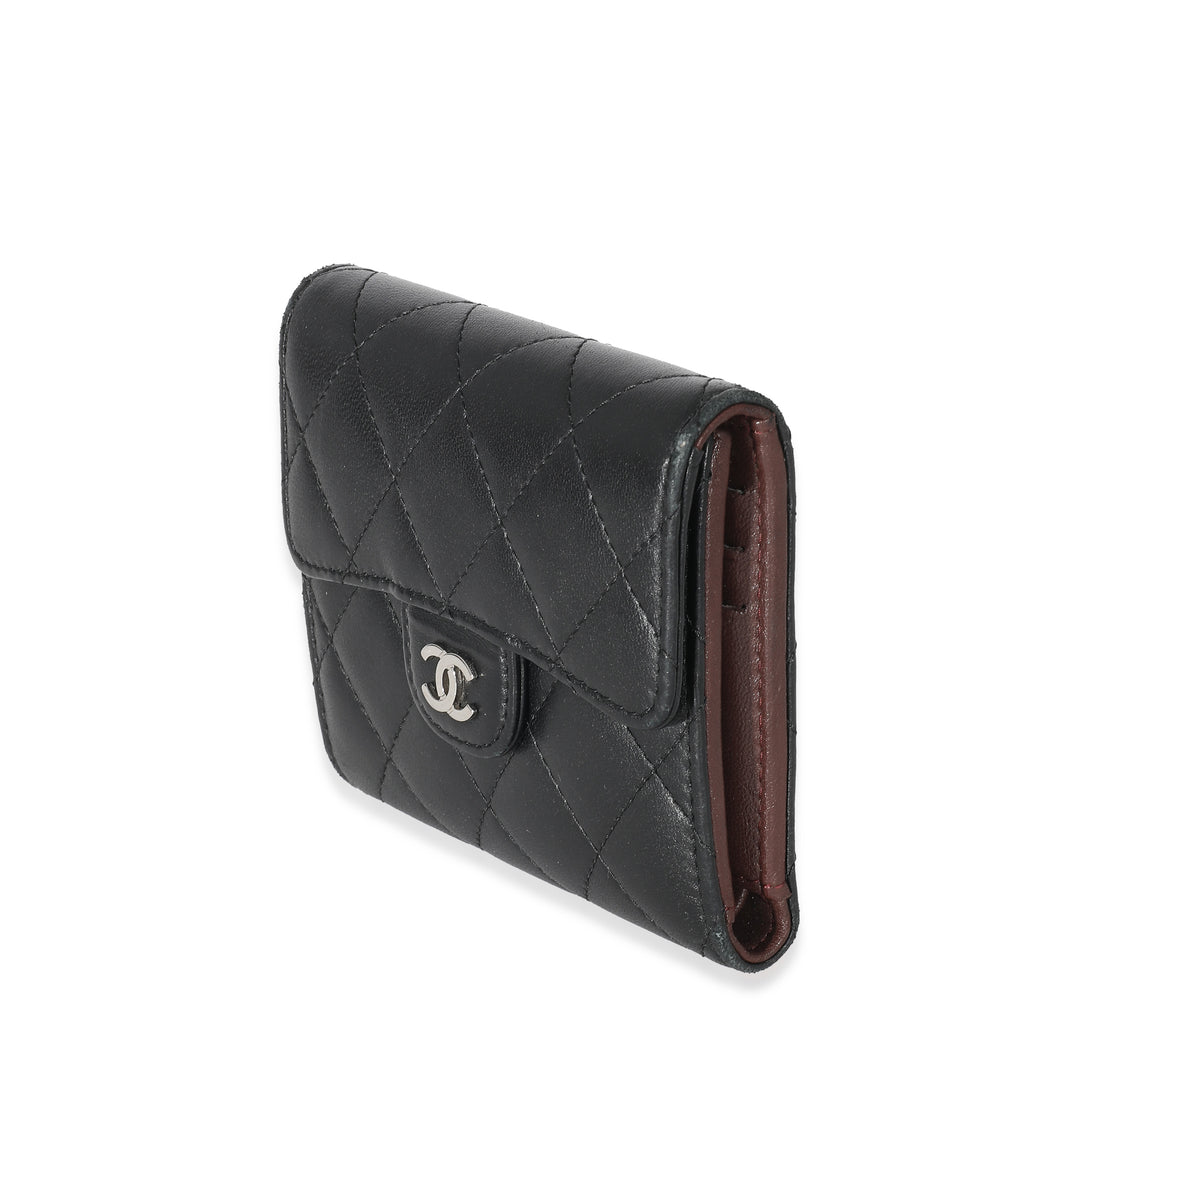 Small Wallets - Small Leather Goods — Fashion